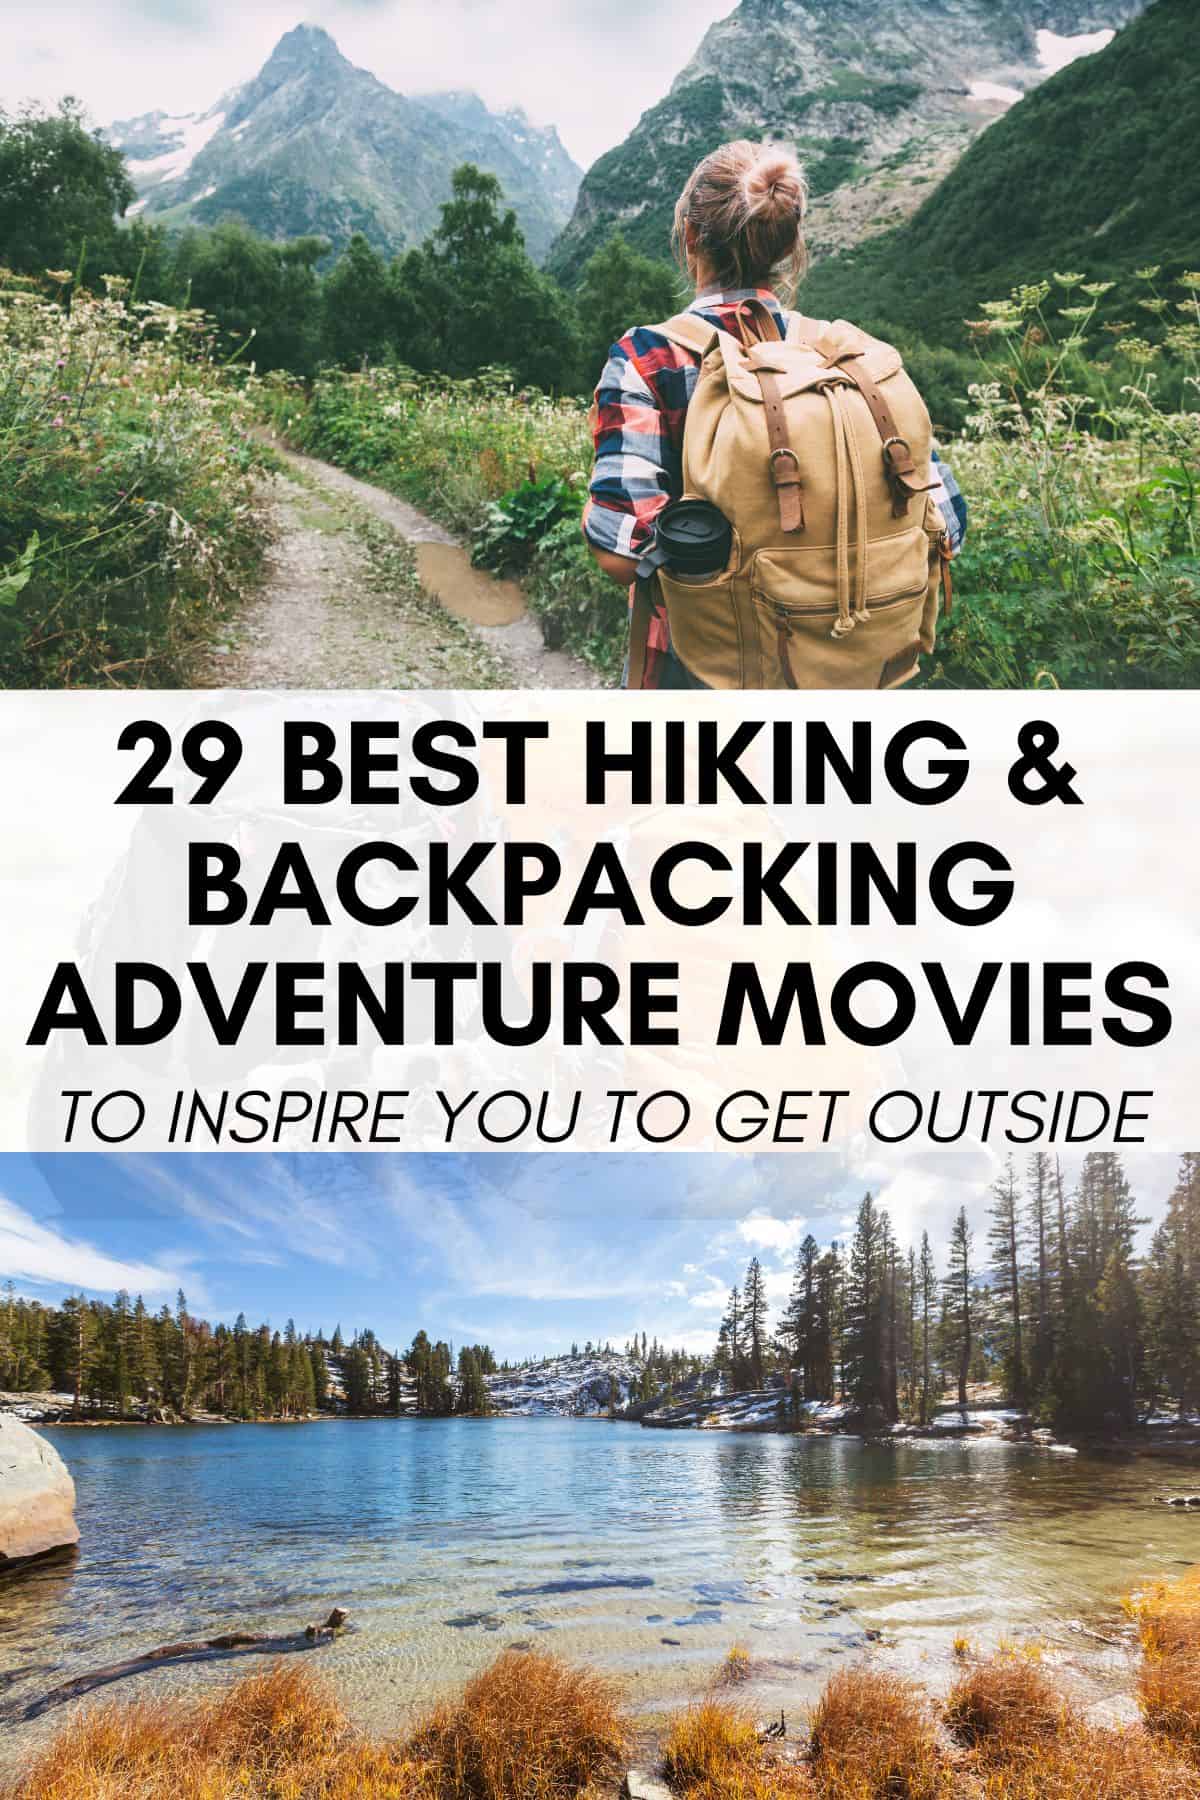 collage of a woman backpacking outdoors and a beautiful lake scene. Text overlay in the middle says Best Backpacking & Hiking Adventure Movies to inspire you to get outside